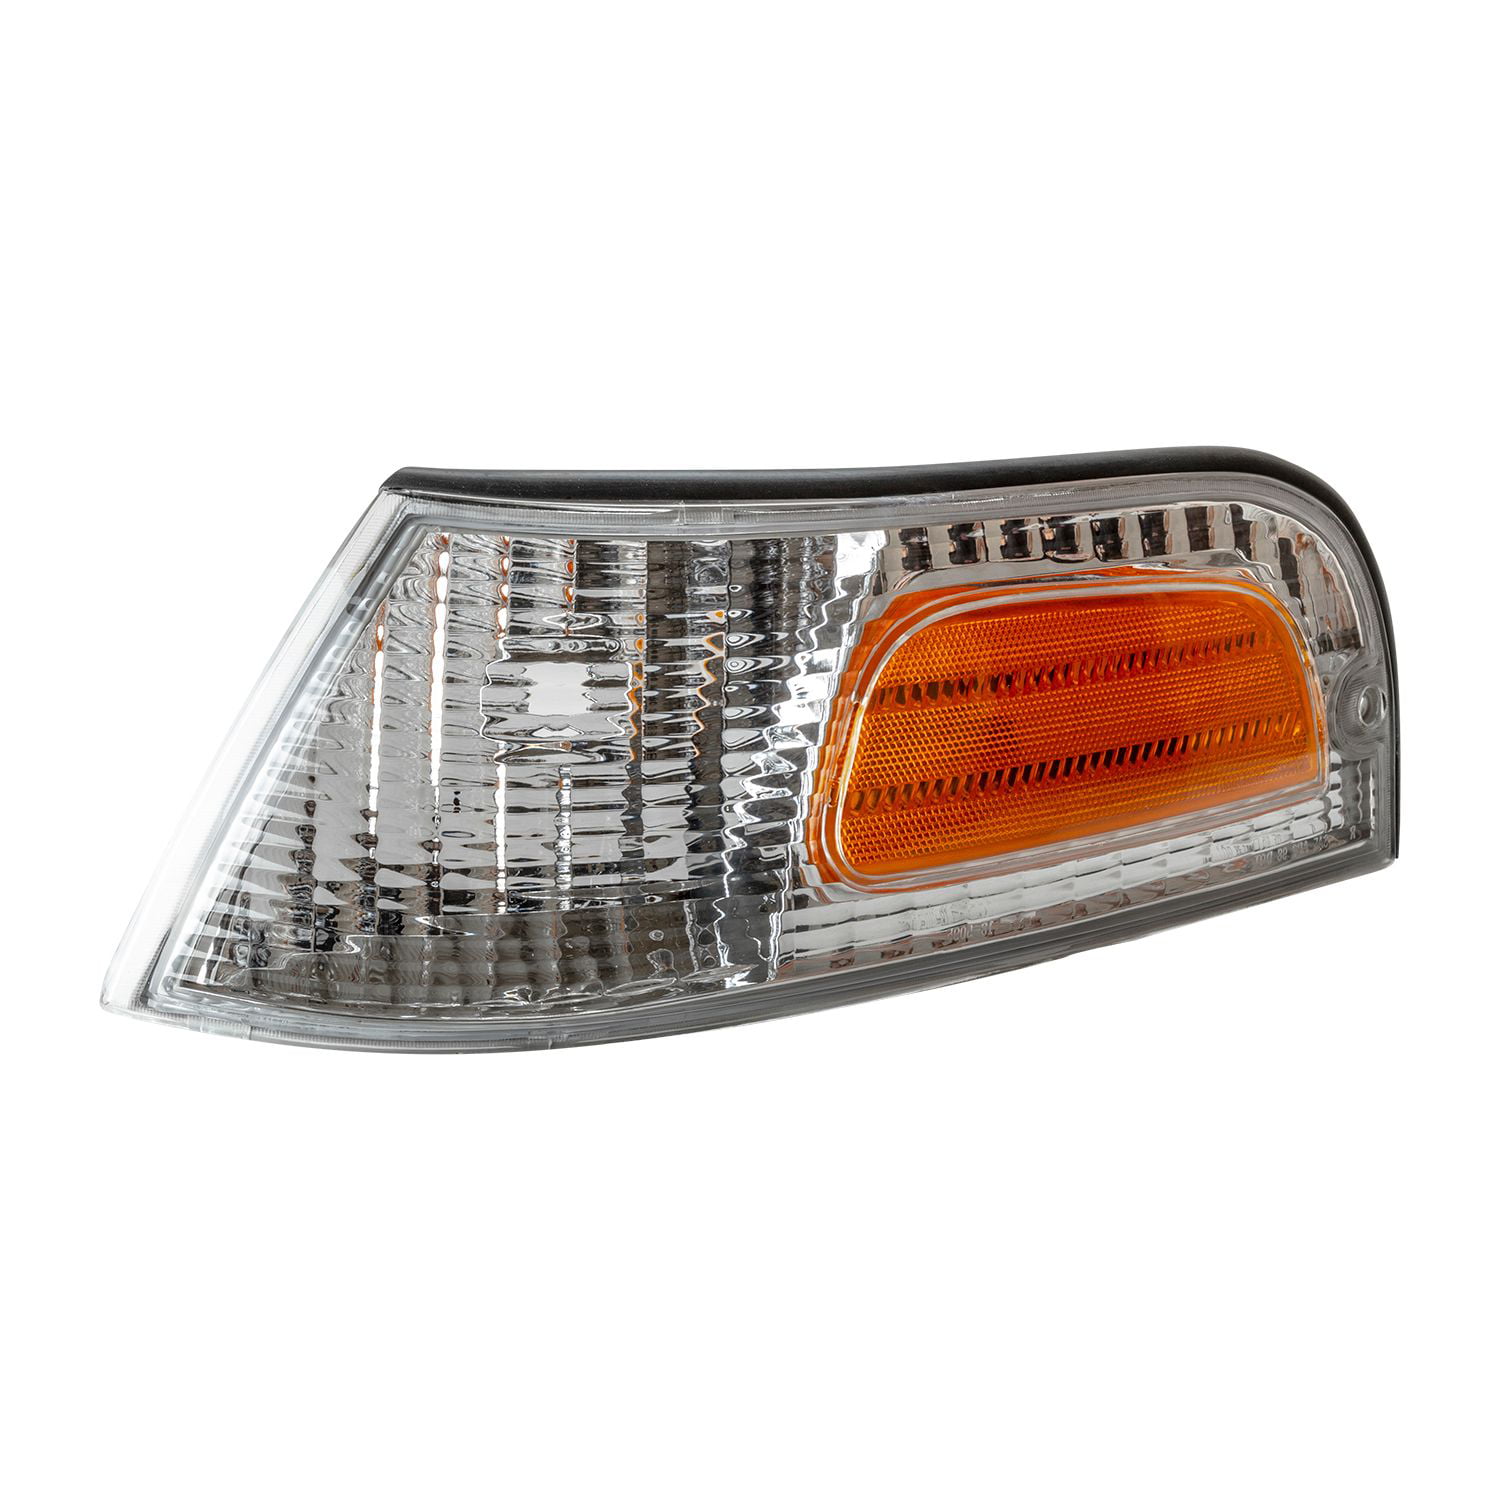 TYC 18-5096-01 Compatible with Ford Crown Victoria Driver Side Replacement Parking/Side Marker Lamp Assembly 